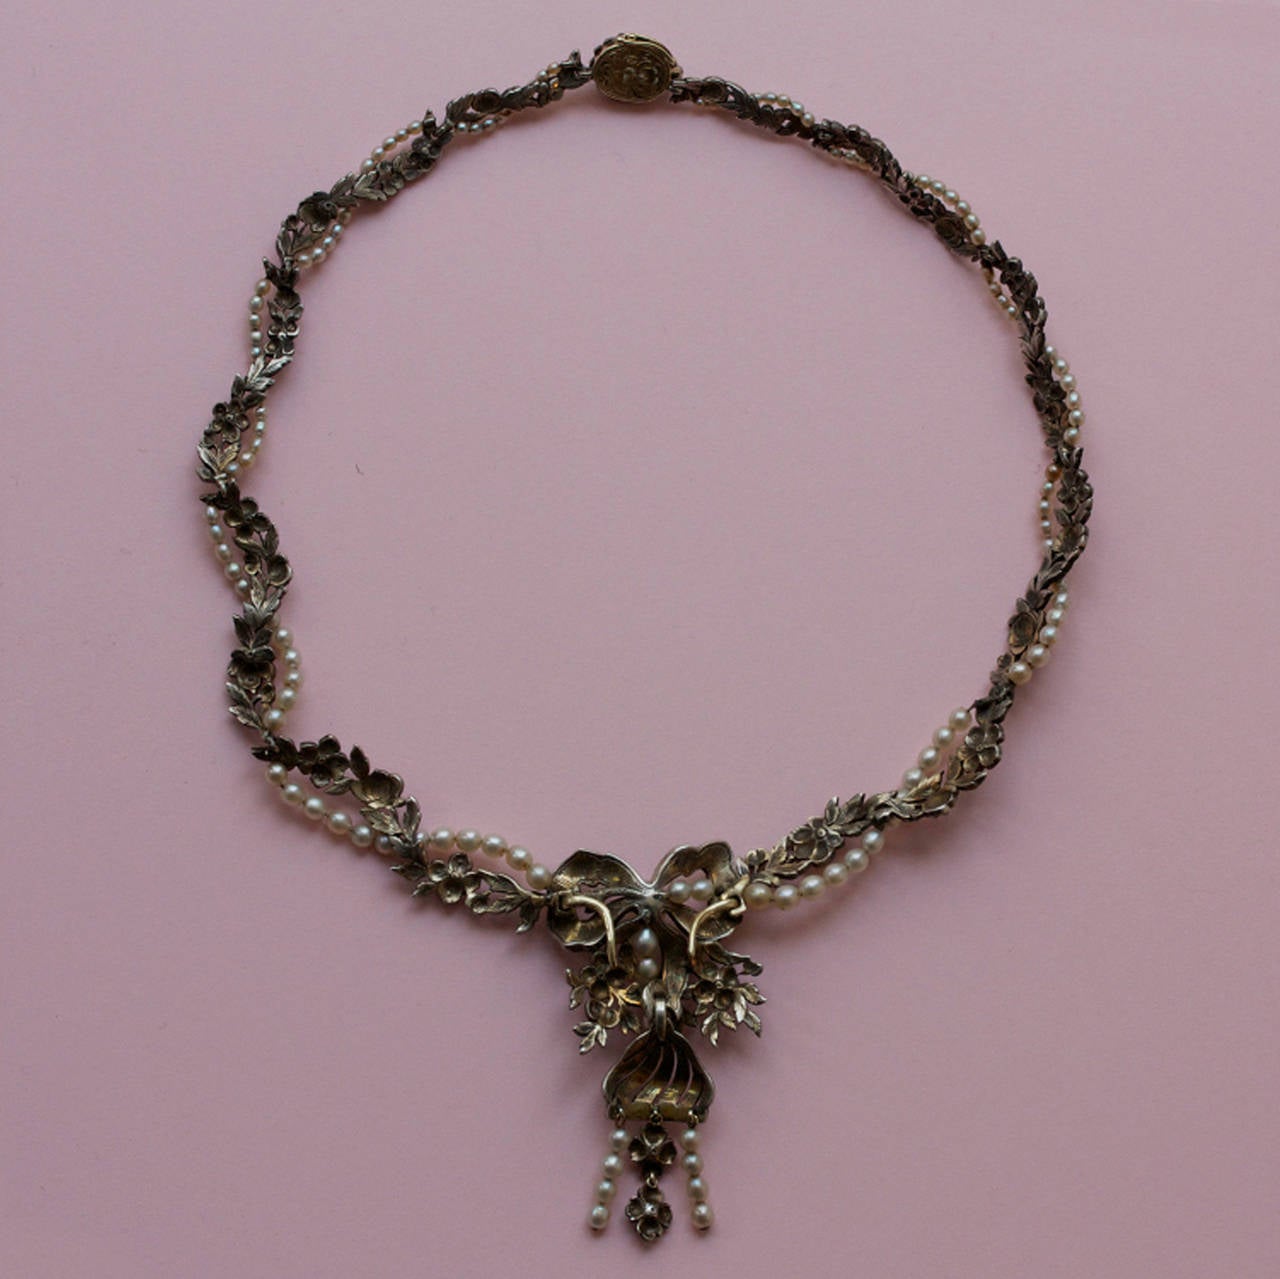 Pearl Rose Cut Diamond Flower Garland Necklace For Sale at 1stdibs